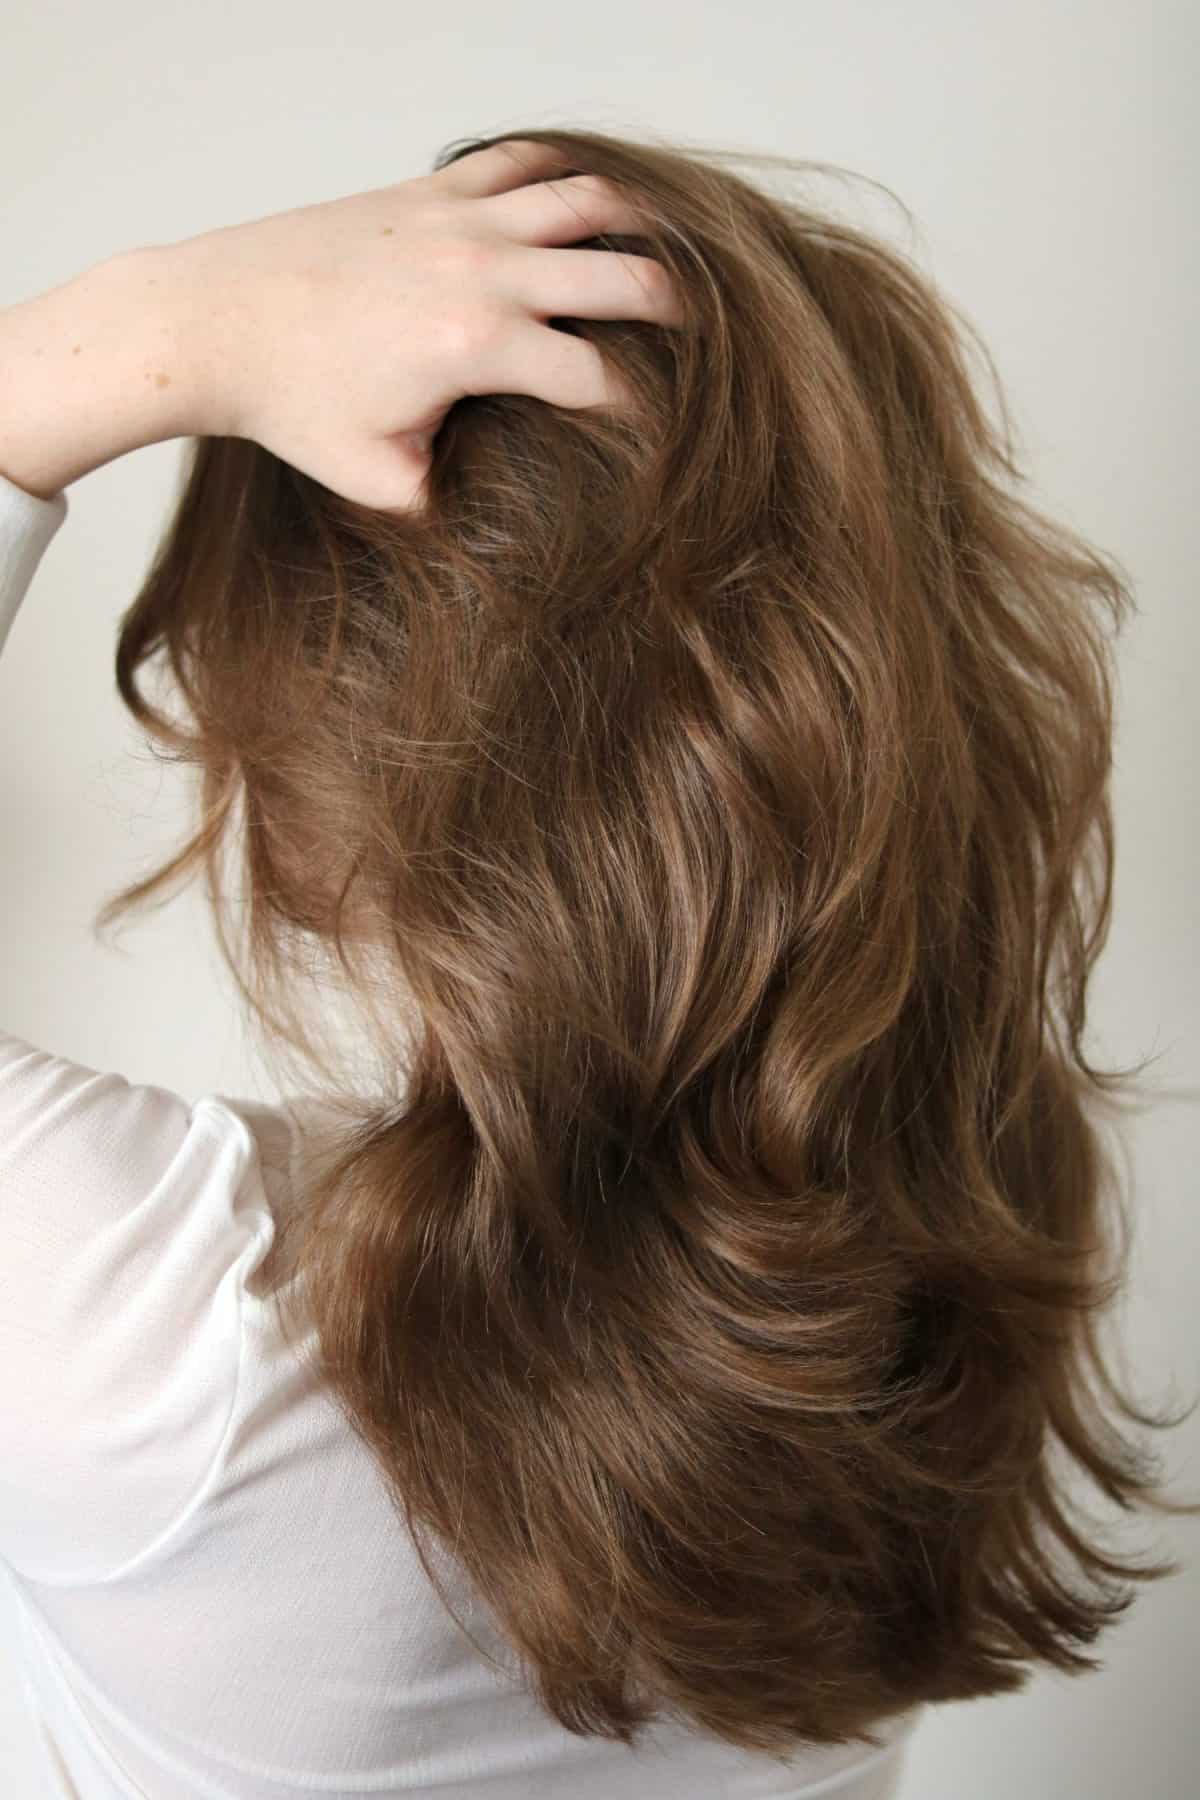 Young woman with long, dark blonde hair running her fingers through hair. New haircut. Playfulness.